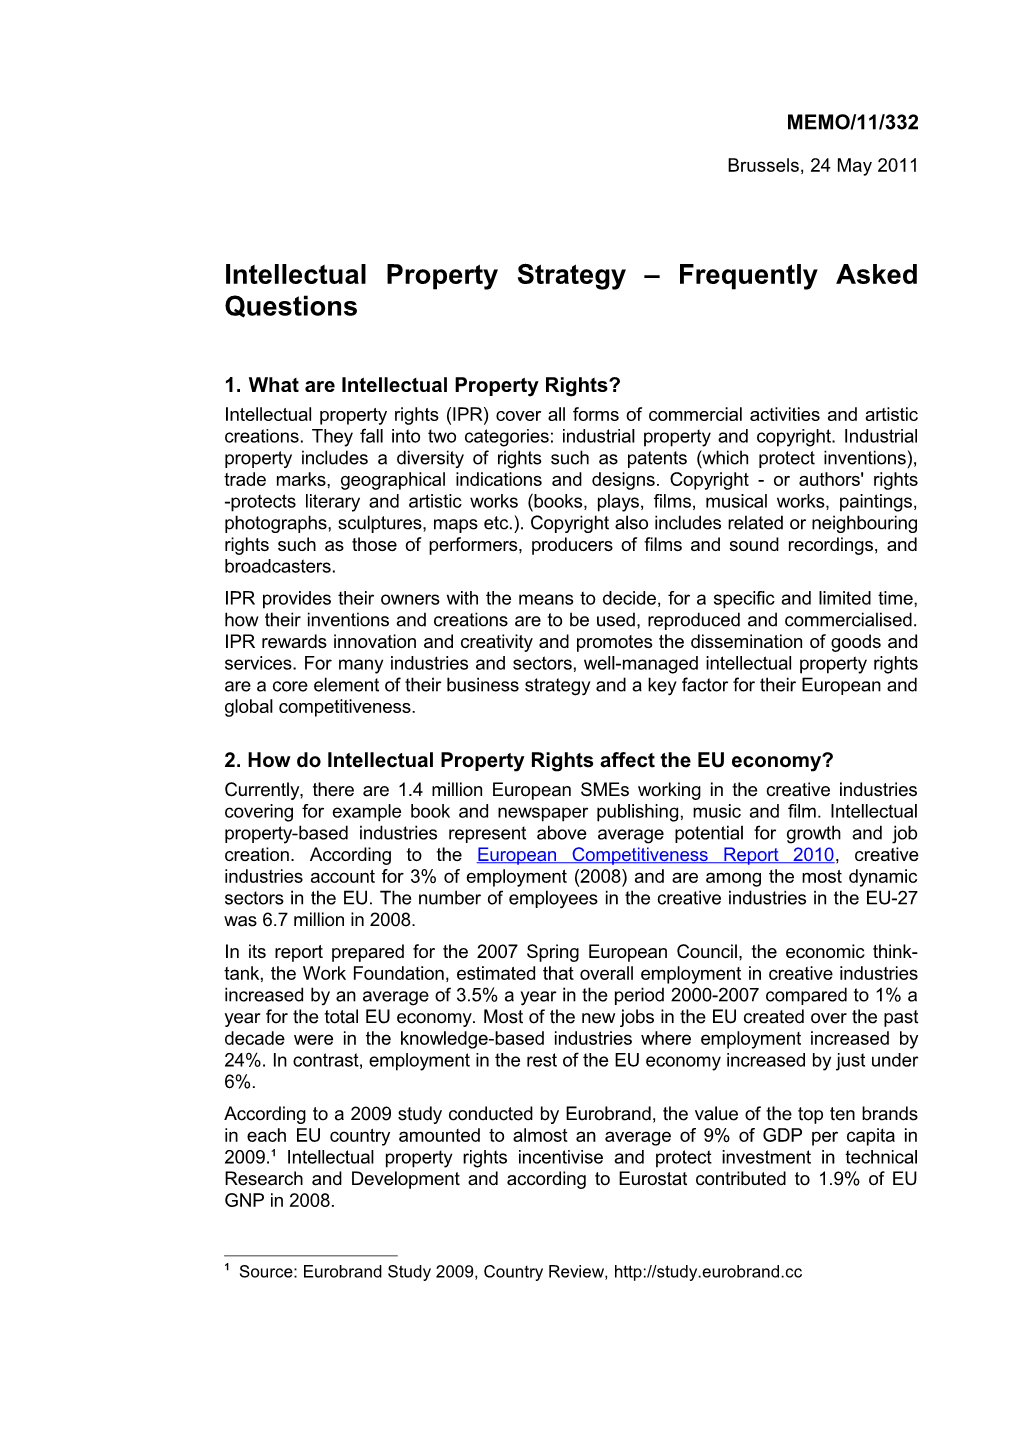 Intellectual Property Strategy Frequently Asked Questions